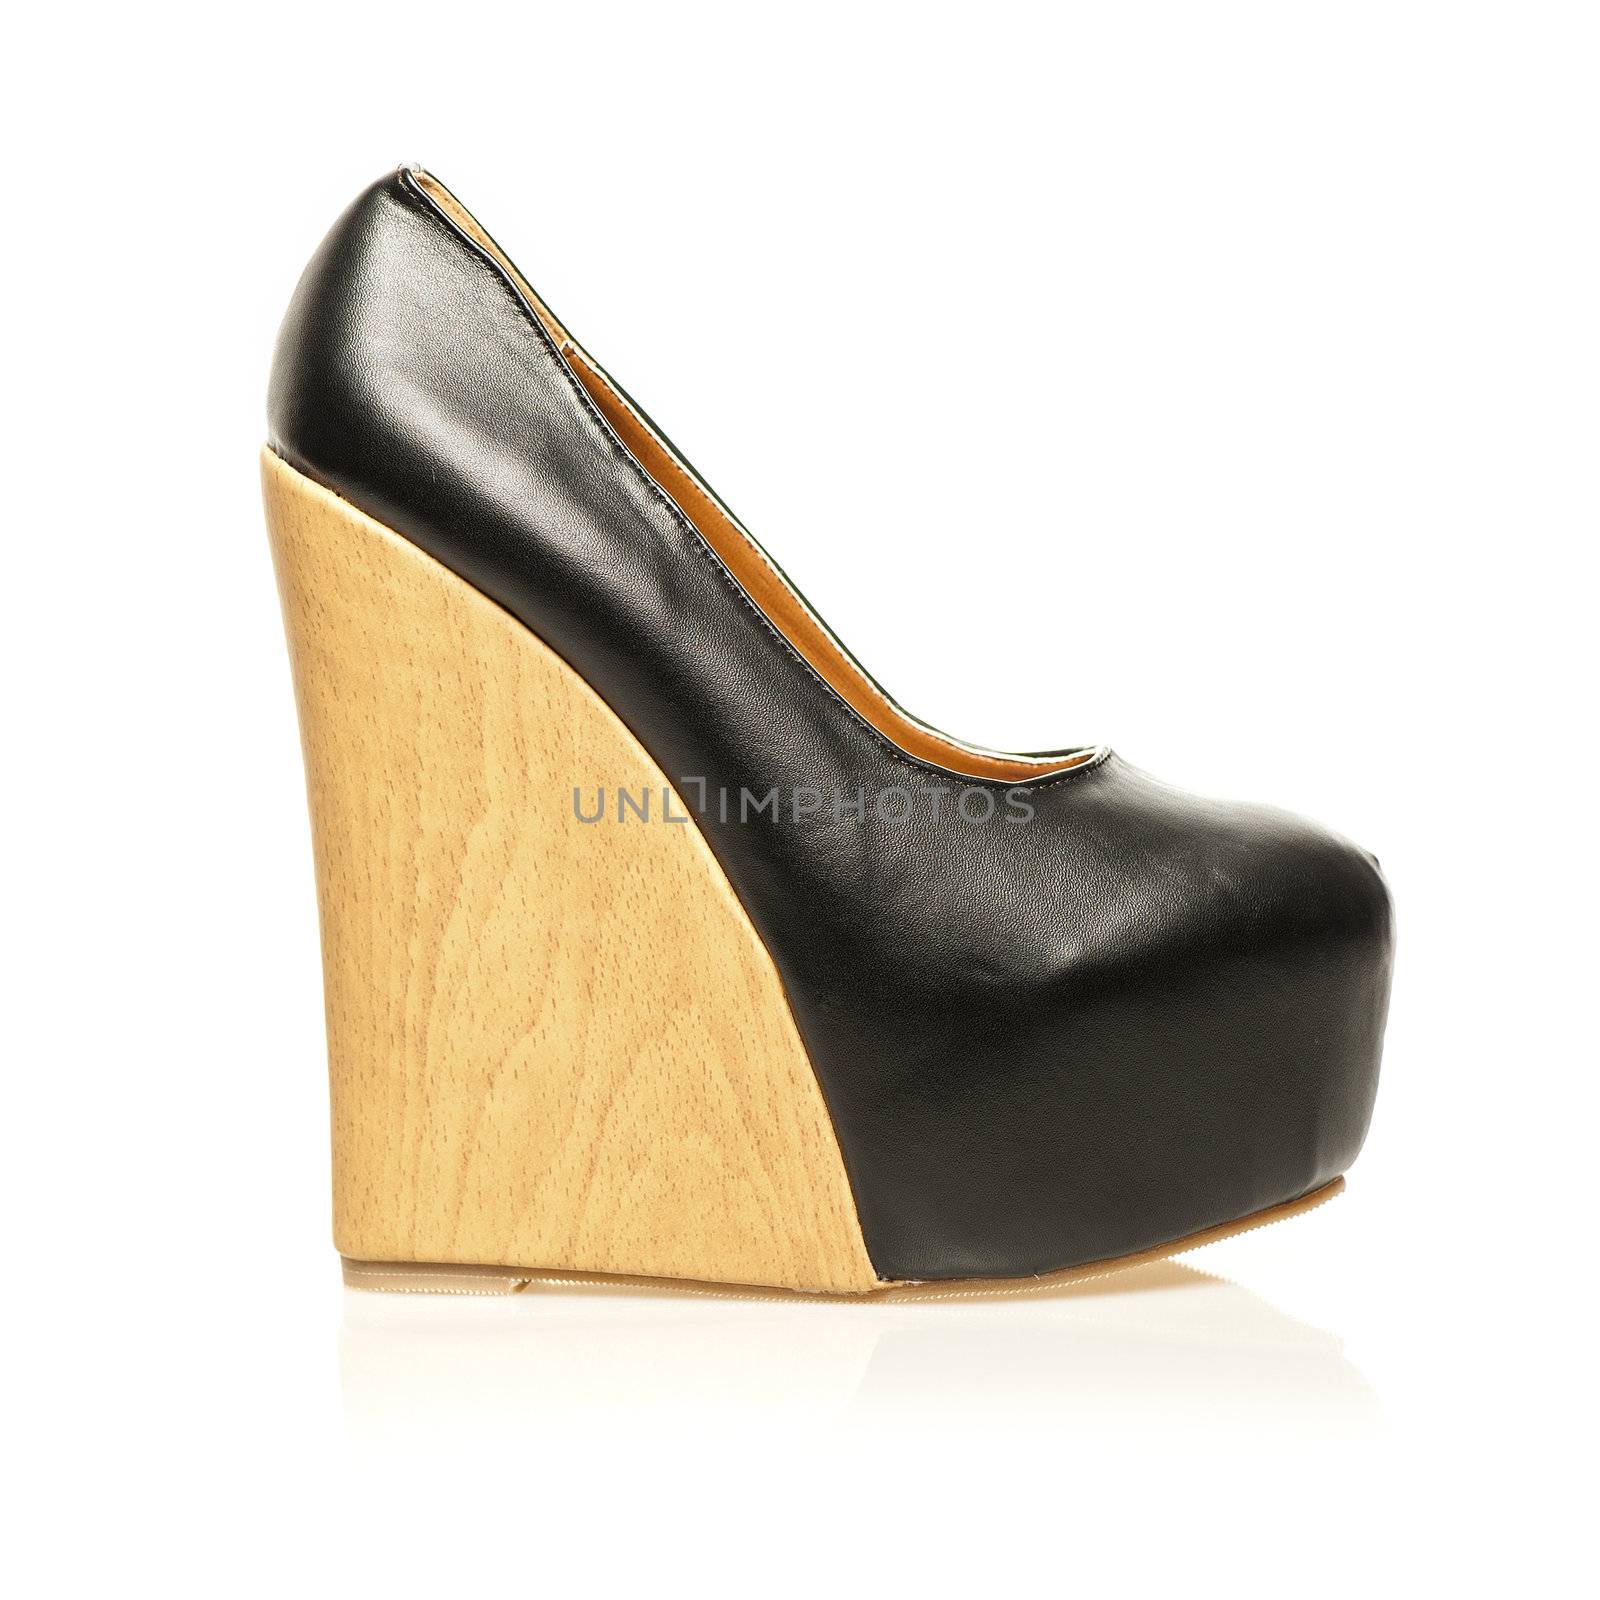 High Heels shoes in wedge design and with platform by stockbymh